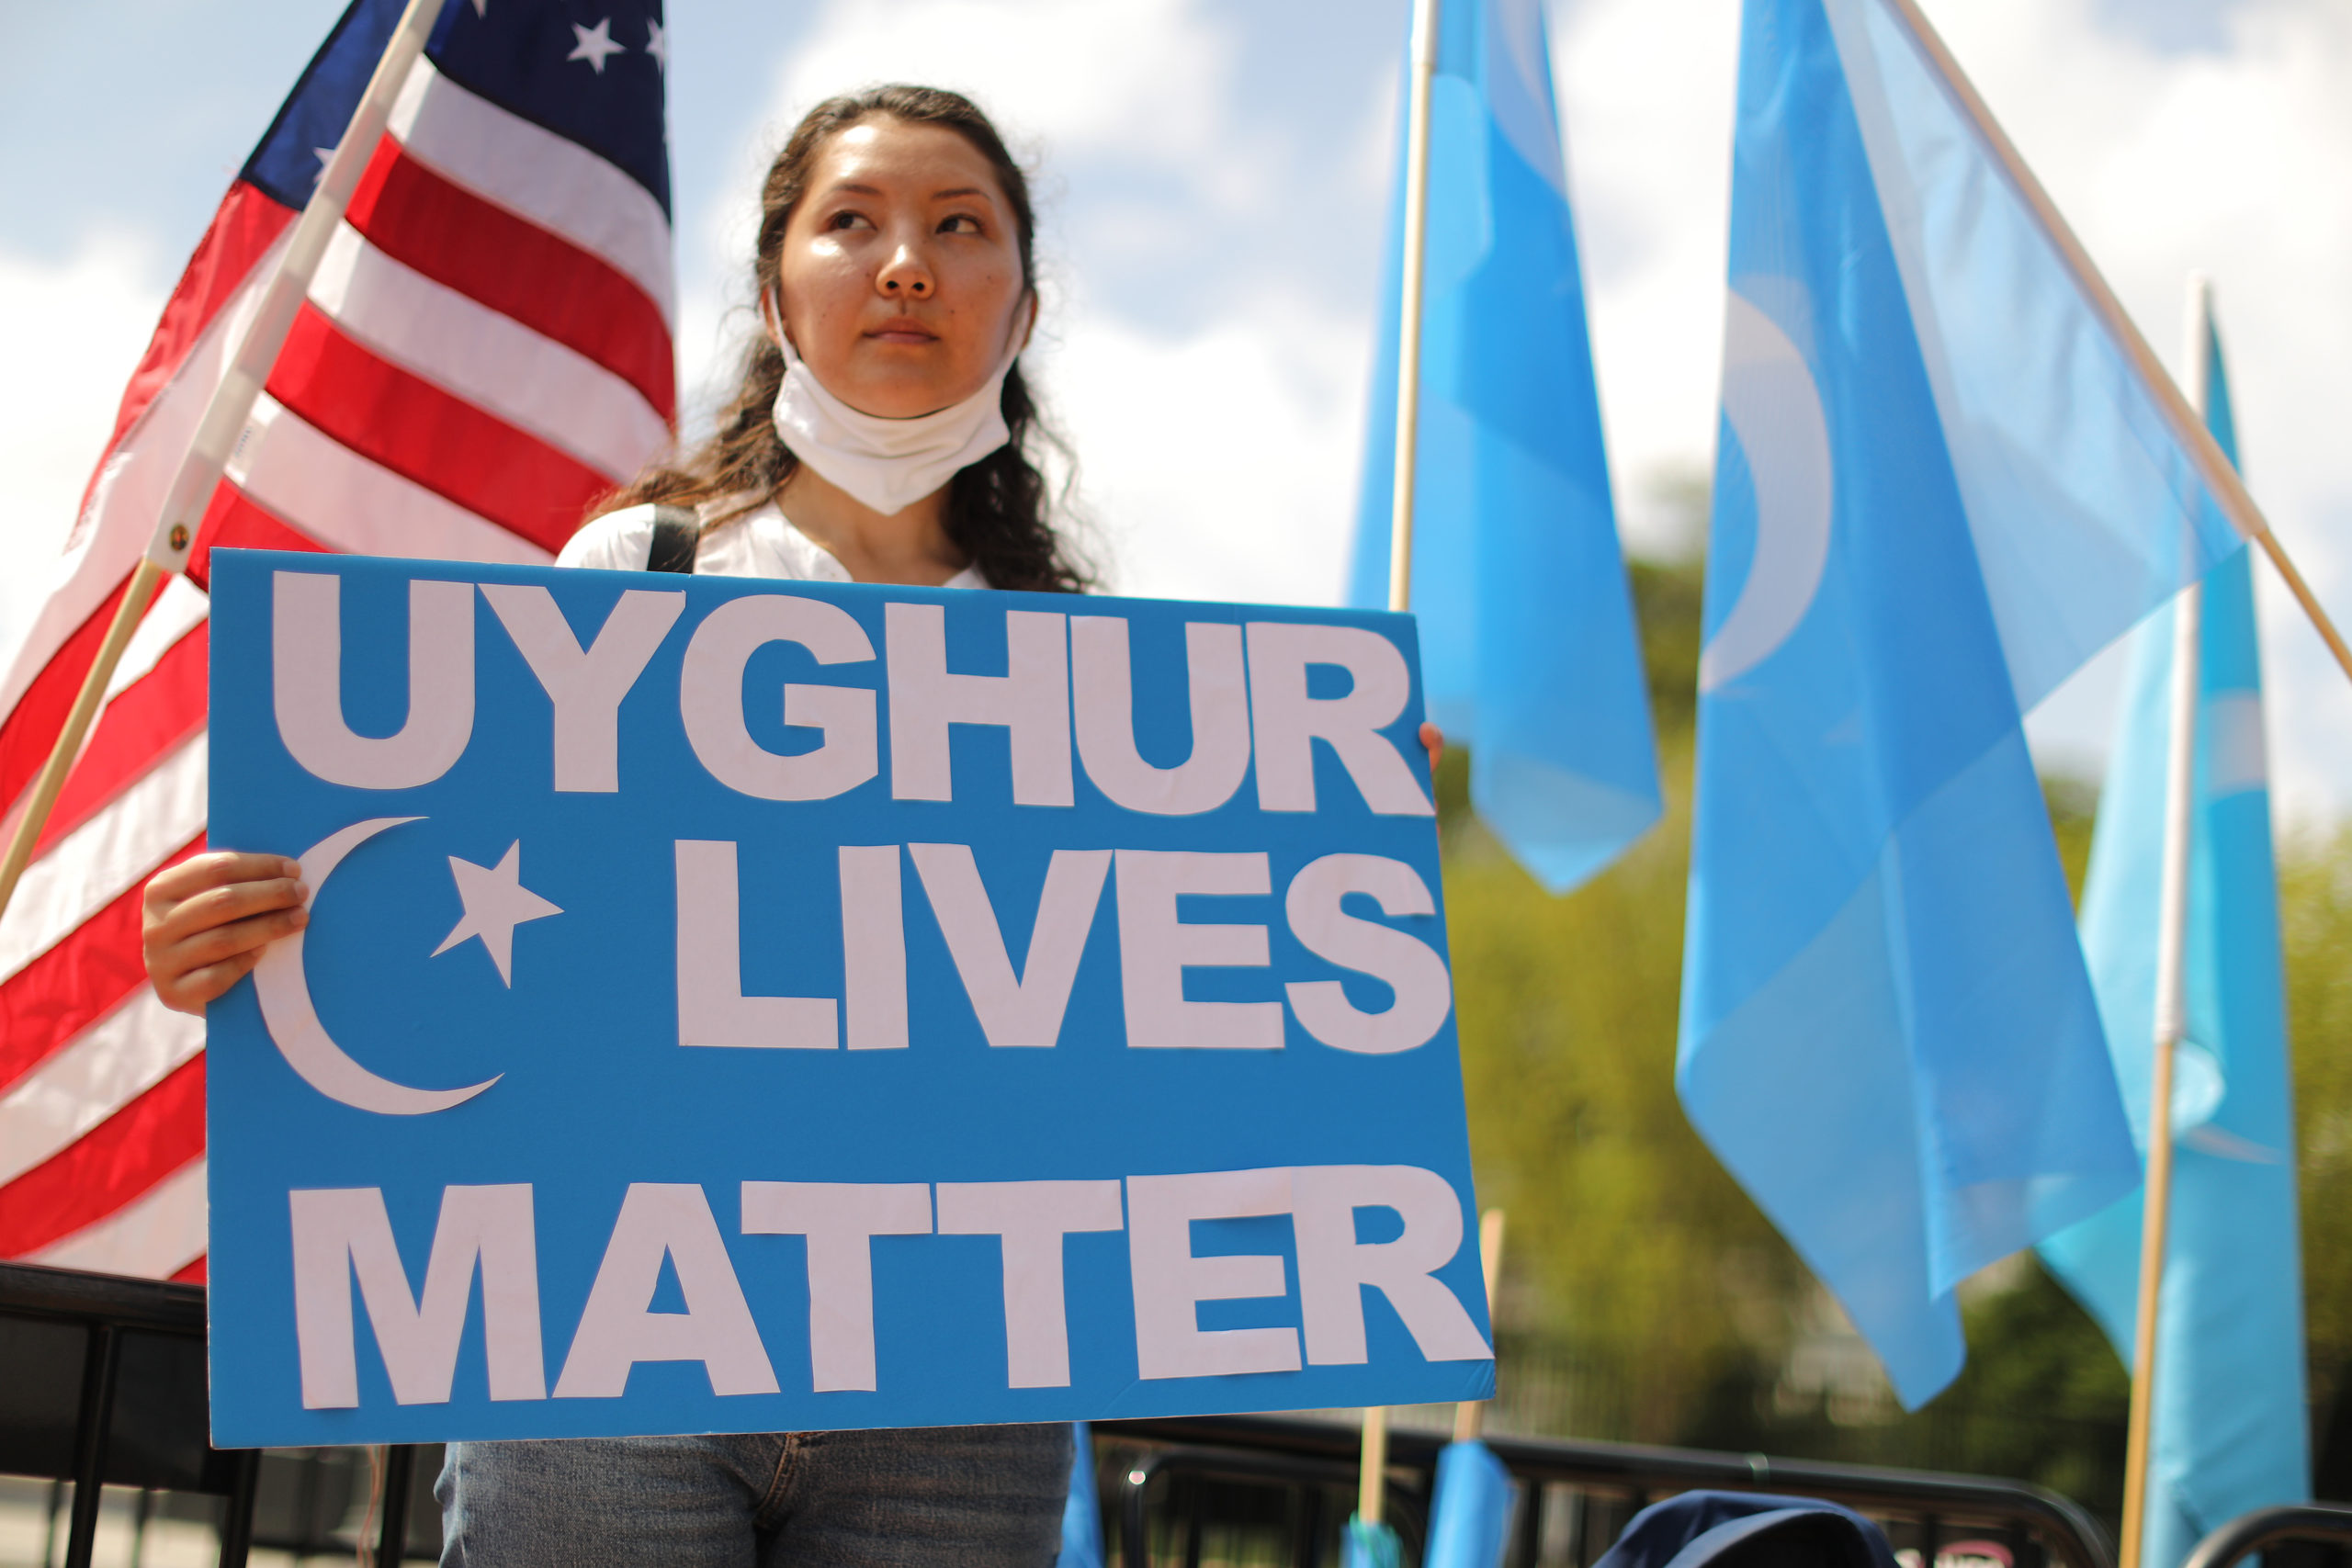 WASHINGTON, DC - AUGUST 14: Supporters and members of the East Turkistan National Awakening Movement rally outside the White House to urge the United States to end trade deals with China and take action to stop the oppression of the Uyghur and other Turkic peoples August 14, 2020 in Washington, DC. The ETNAM and East Turkistan Government in Exile (ETGE) groups submitted evidence to the international criminal court, calling for an investigation into senior Chinese officials, including Xi Jinping, for genocide and crimes against humanity. (Photo by Chip Somodevilla/Getty Images)